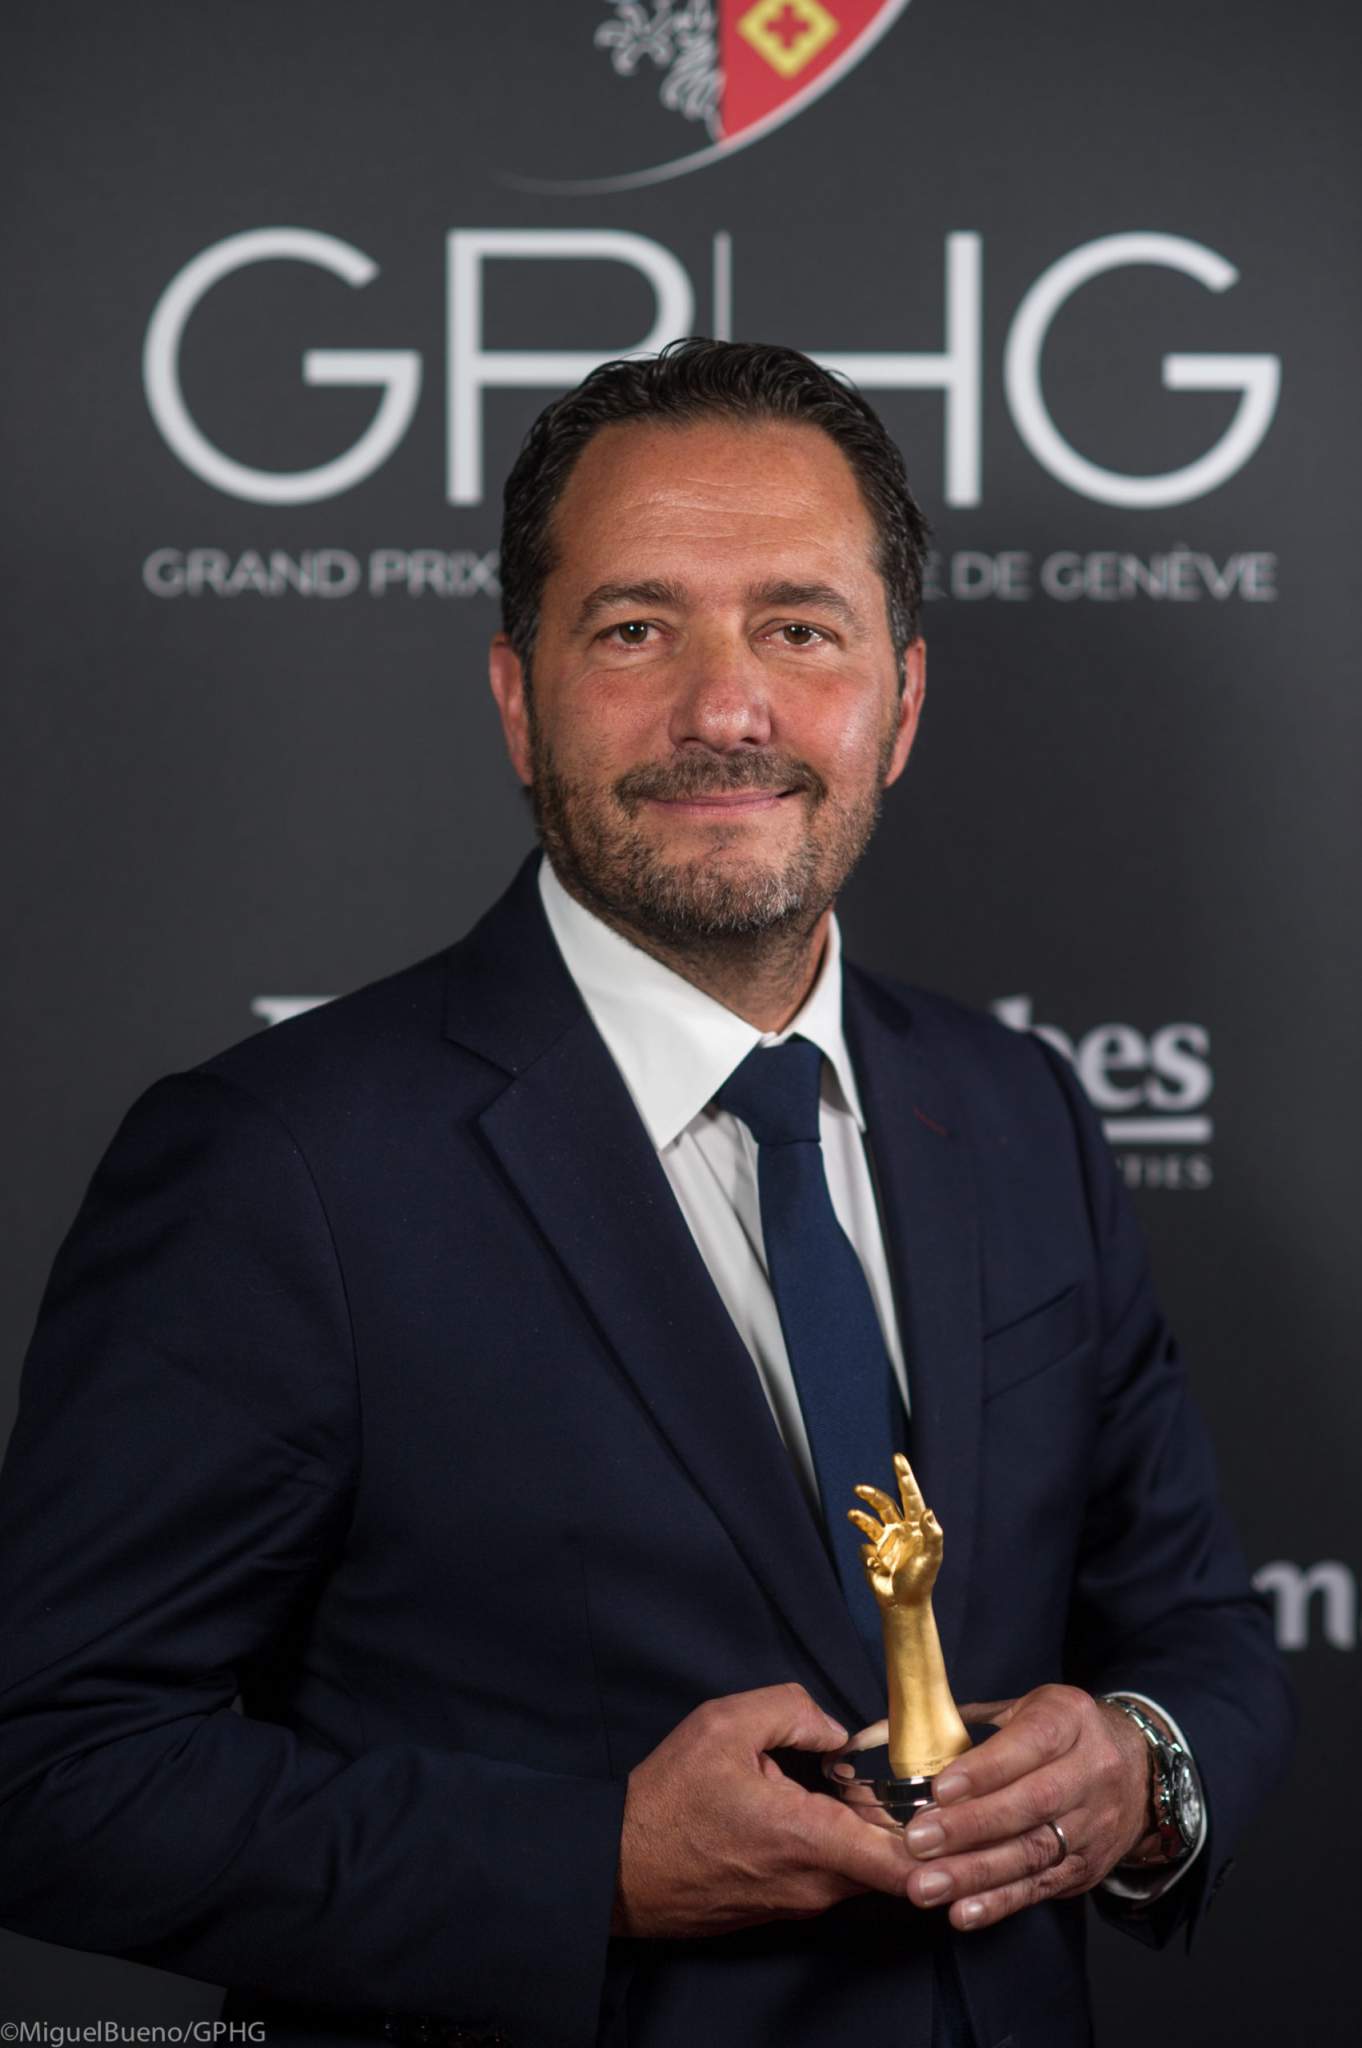 Julien Tornare, CEO of Zenith, winner of the Chronograph Watch Prize 2021